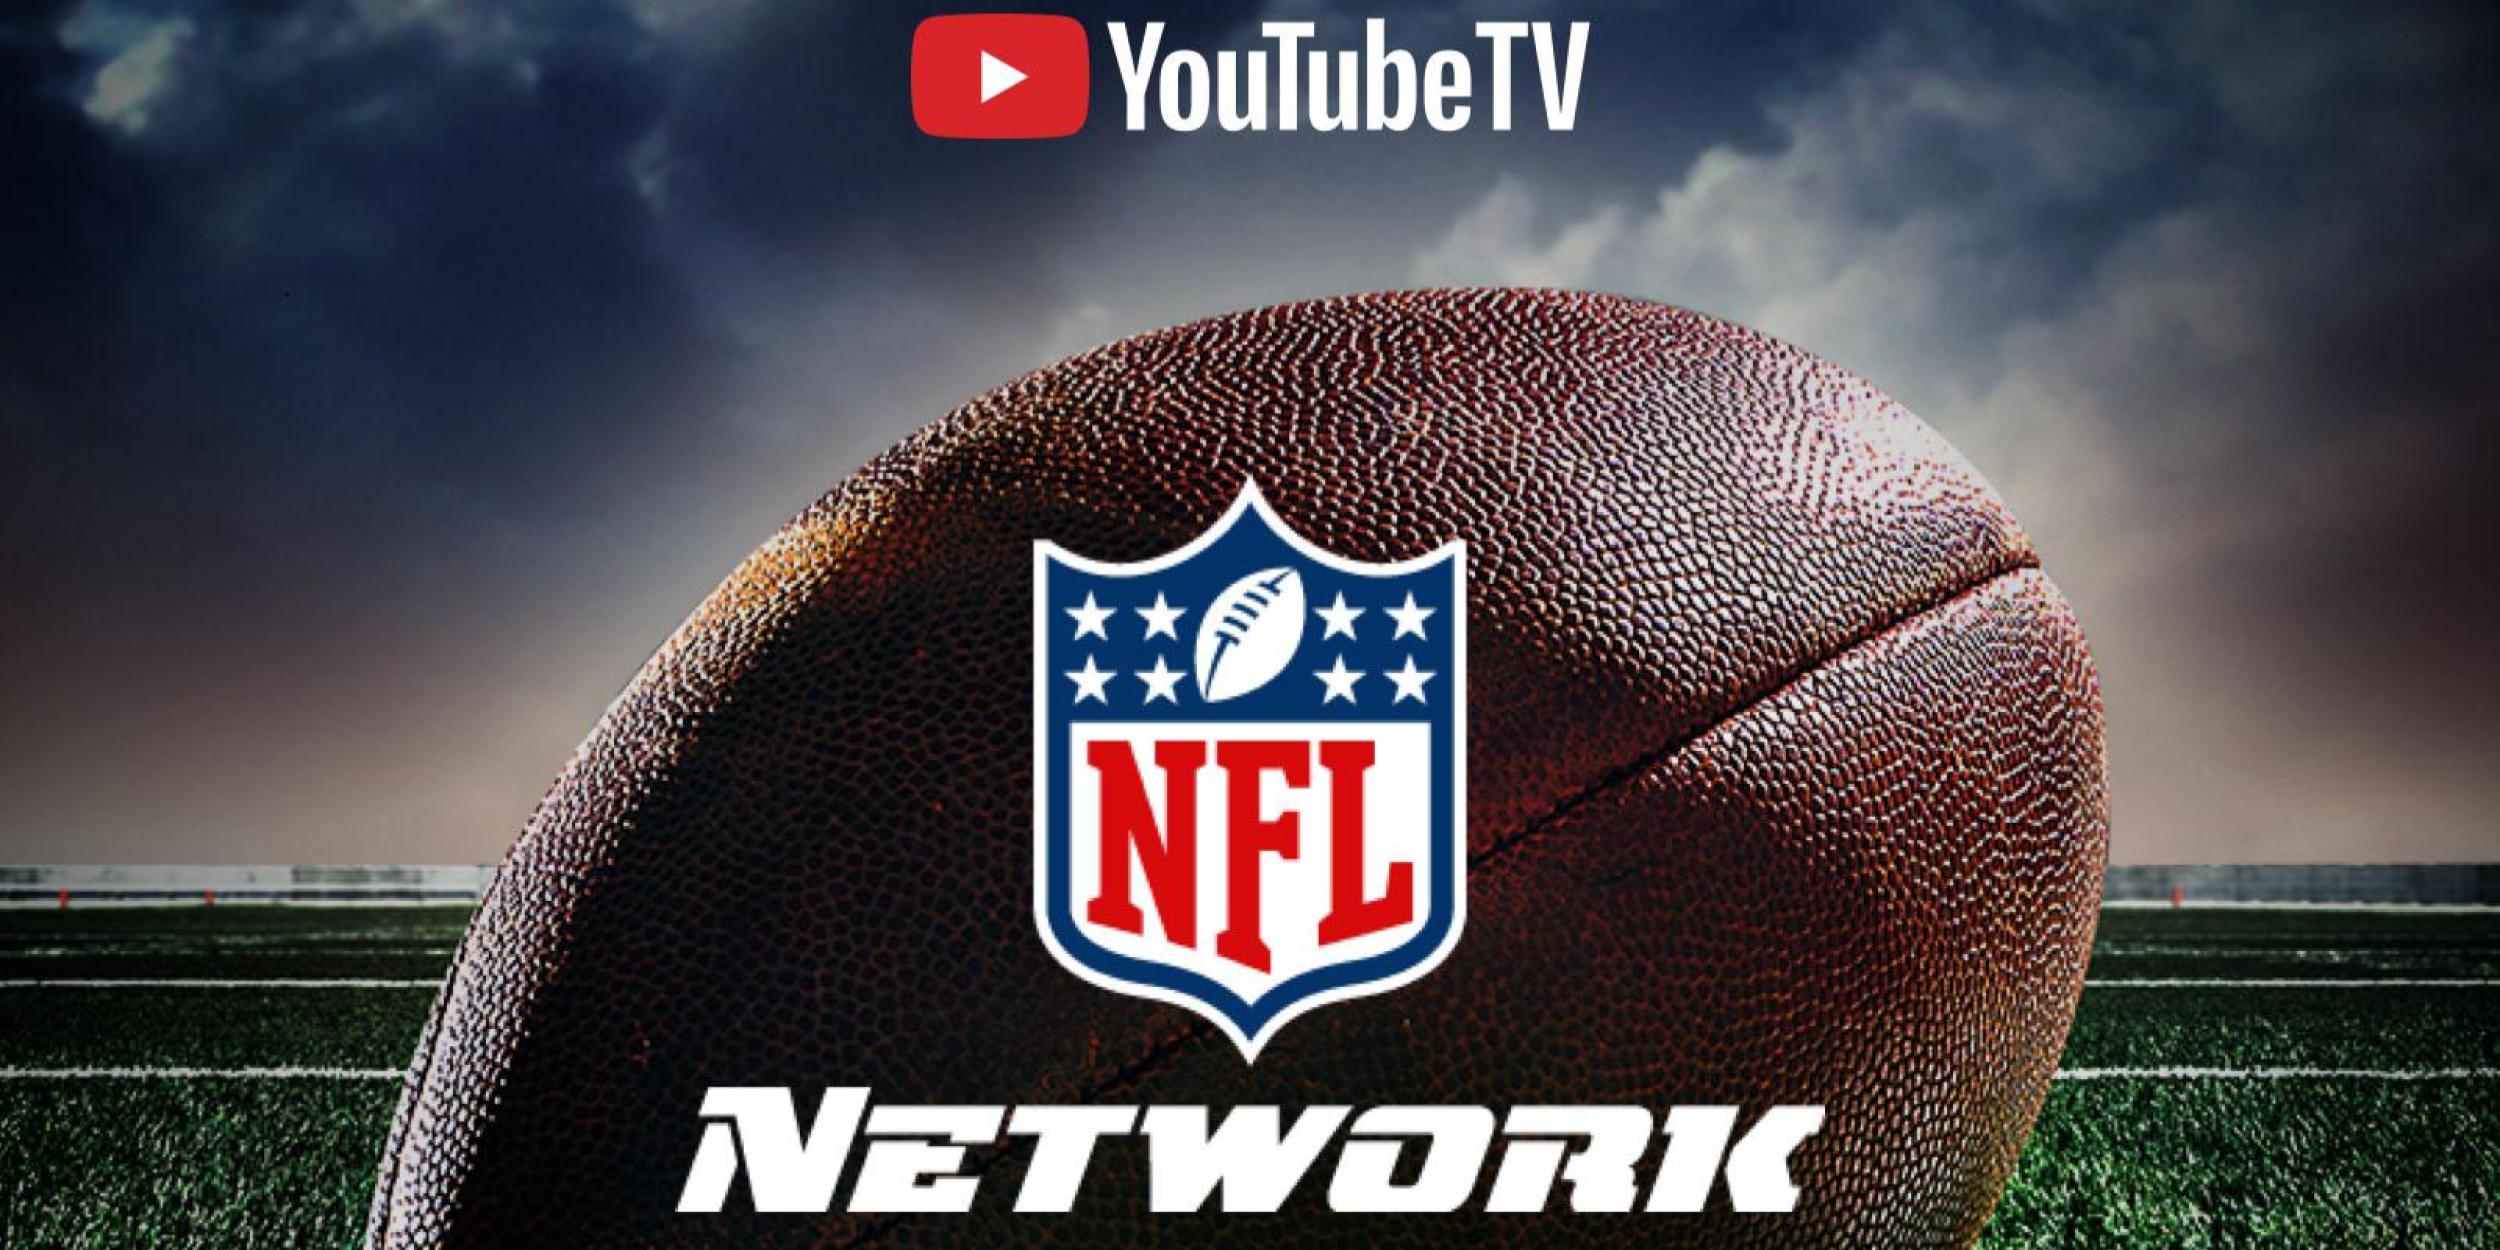 YouTube TV adds NFL Network for all 